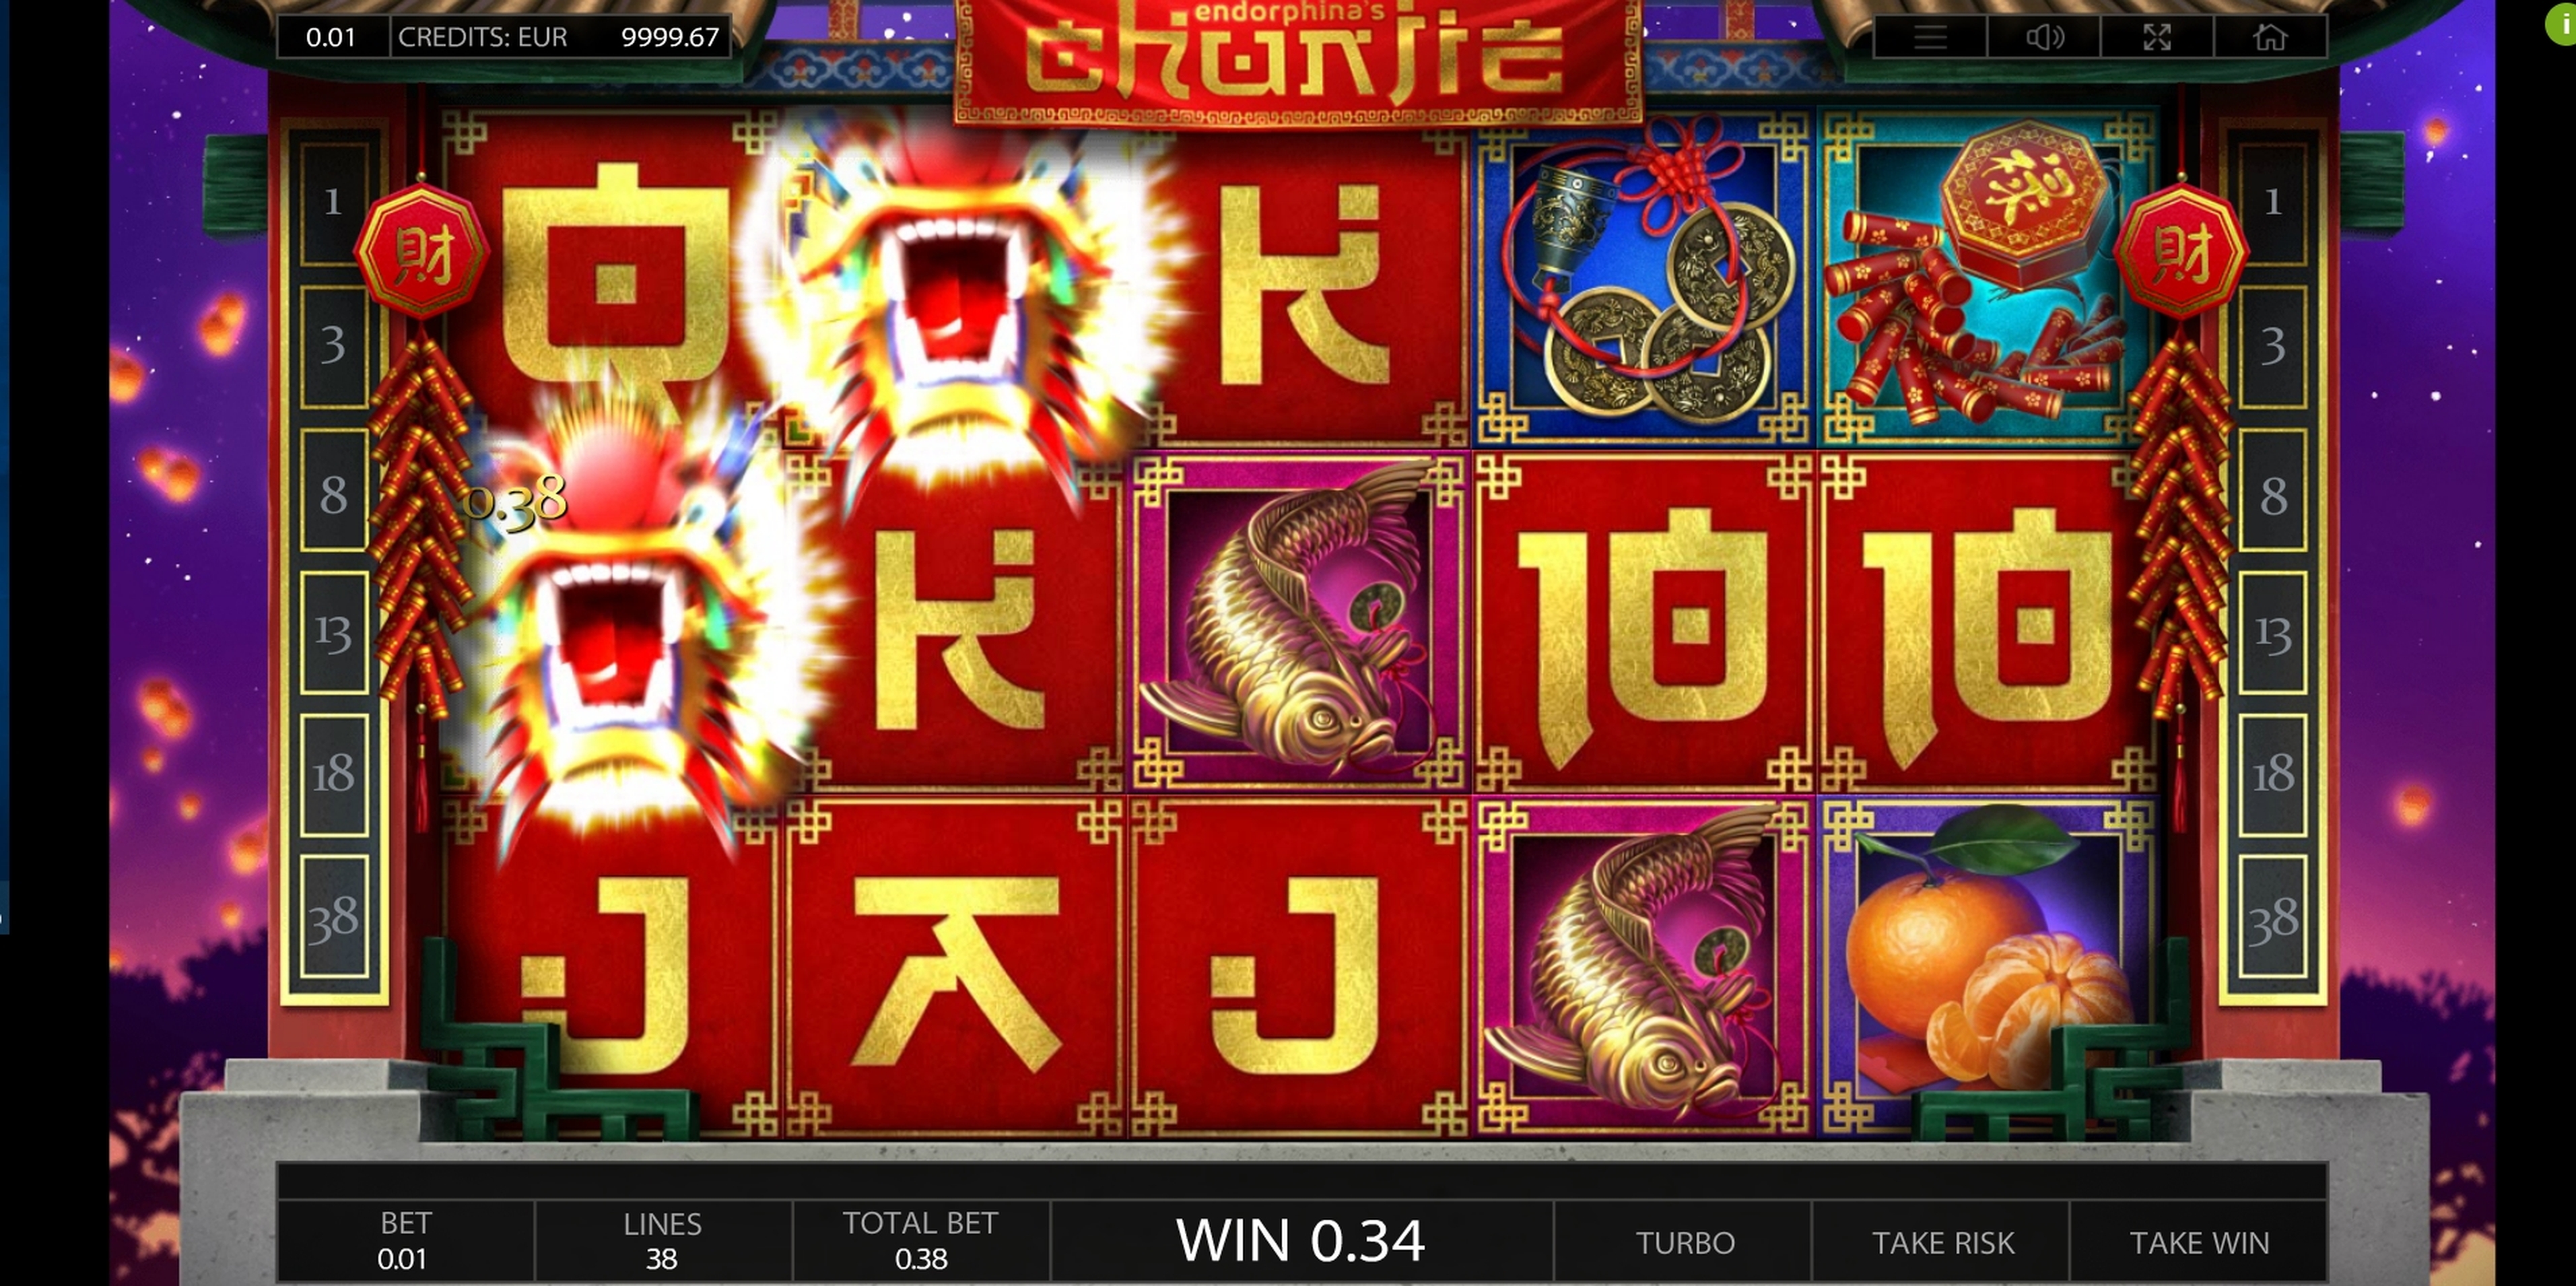 Win Money in Chunjie Free Slot Game by Endorphina